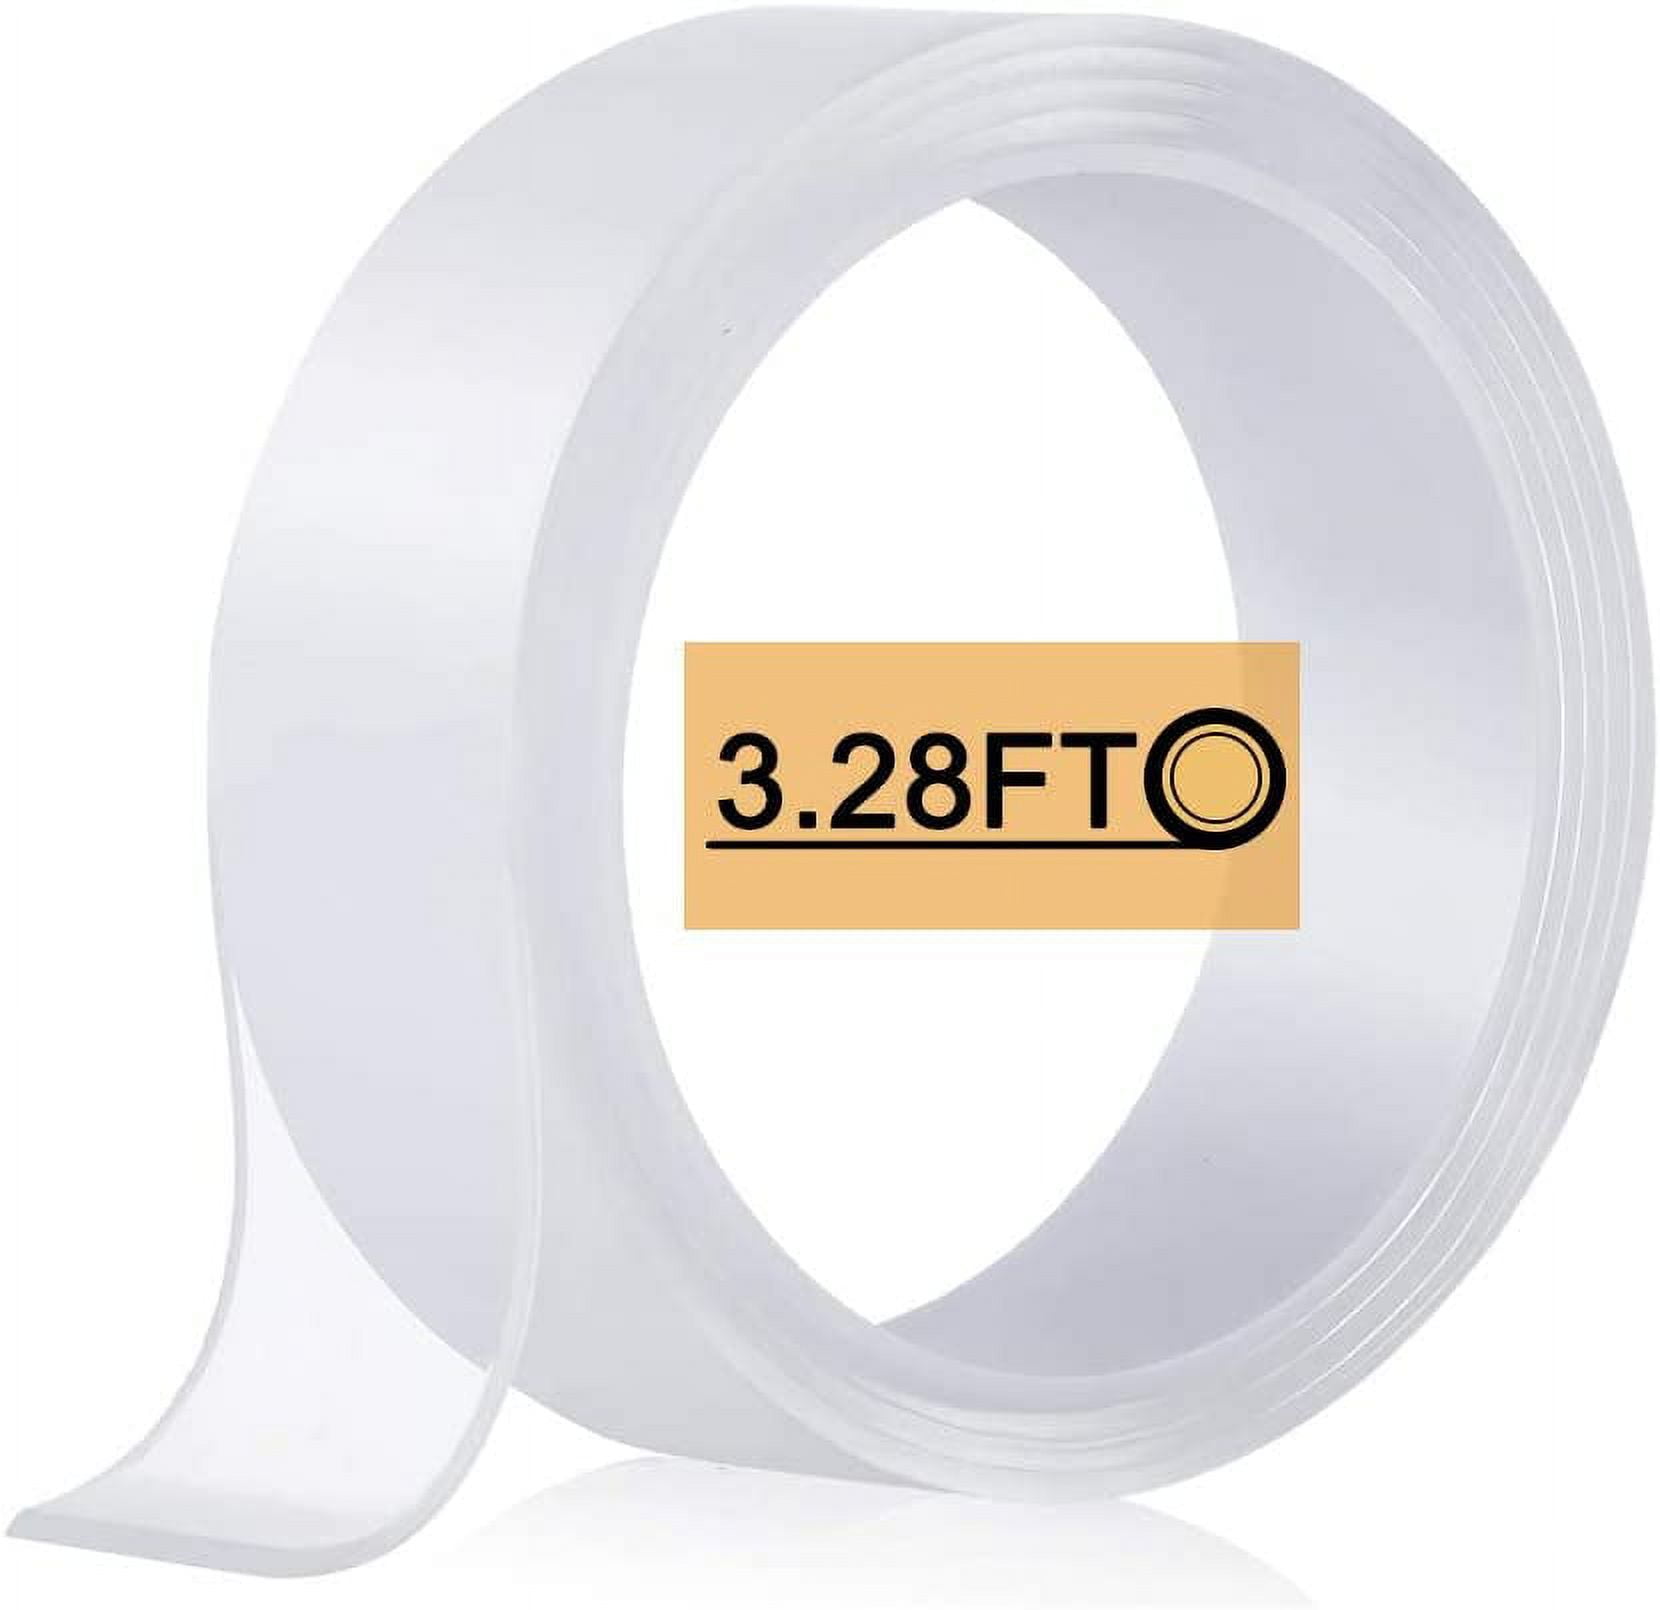 .com : AH3 Tape Nano Double Sided Tape for Walls